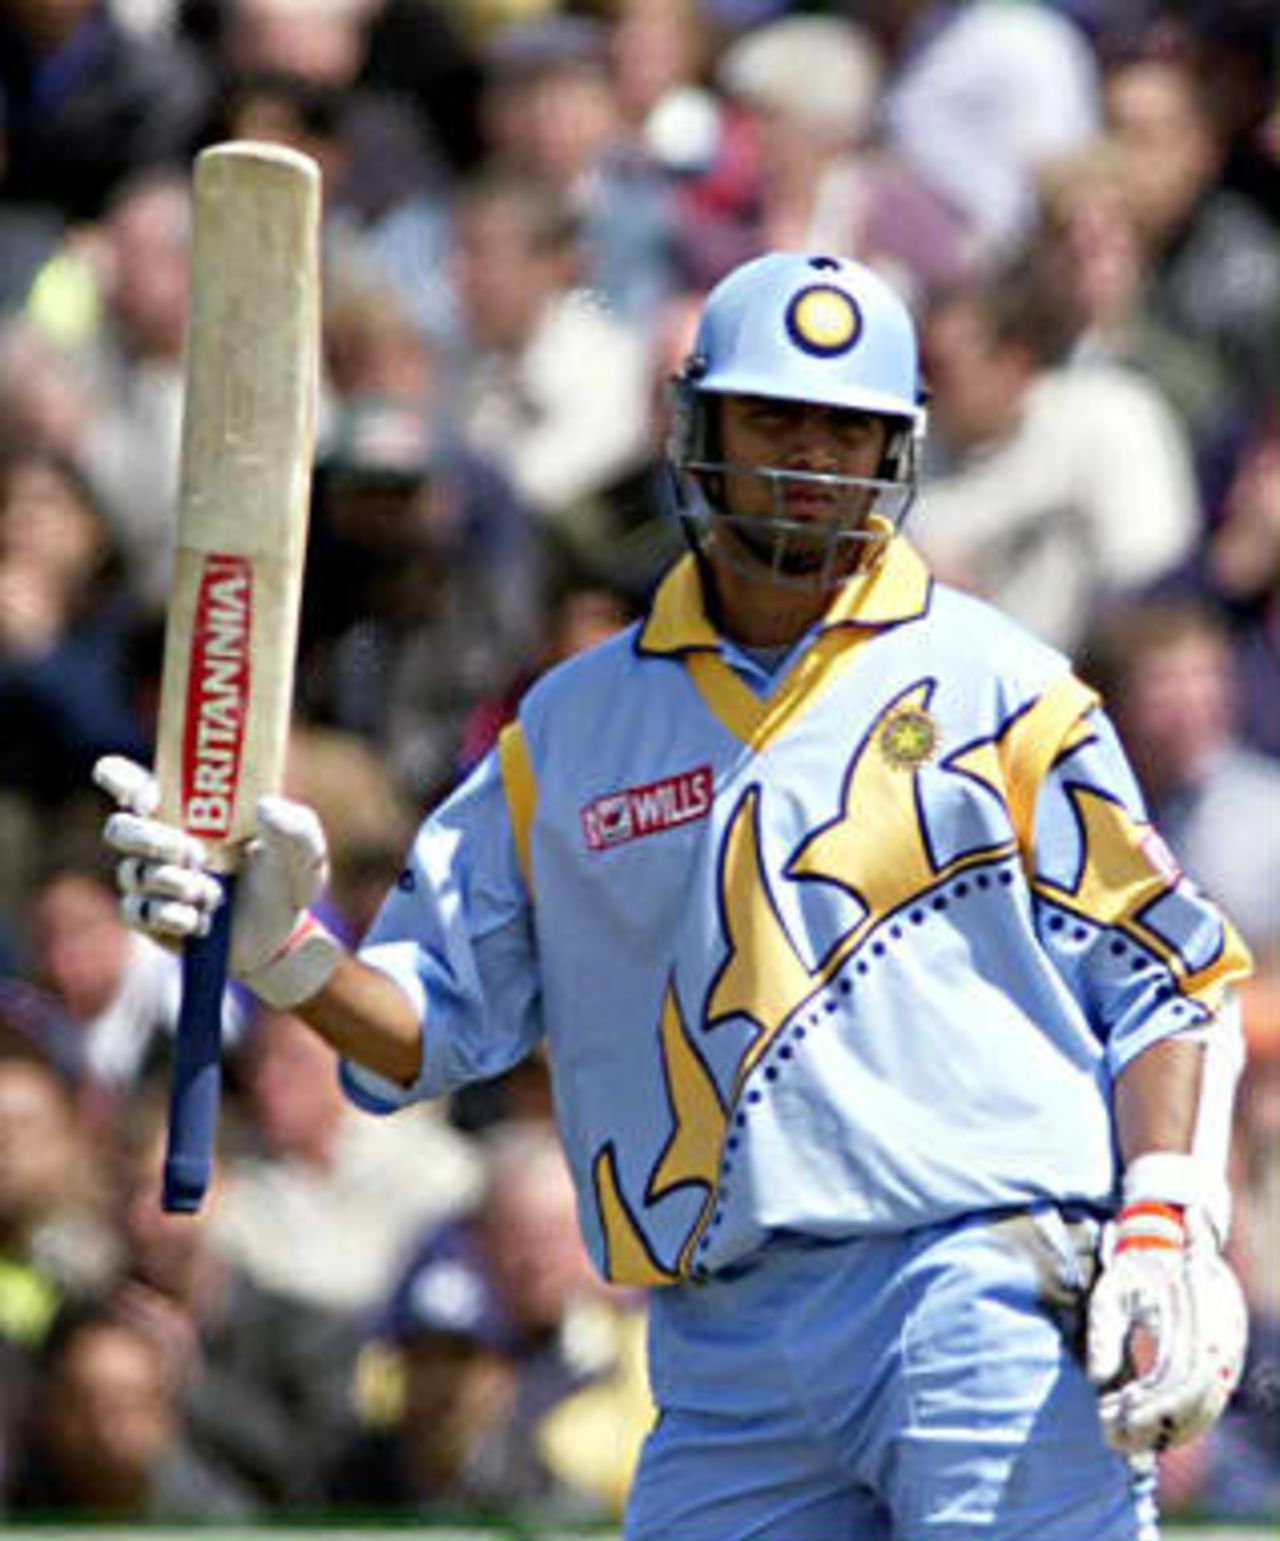 India's Rahul Dravid acknowledges the crowd after scoring 50 runs 08 June 1999 during their Cricket World Cup match at Old Trafford, Manchester